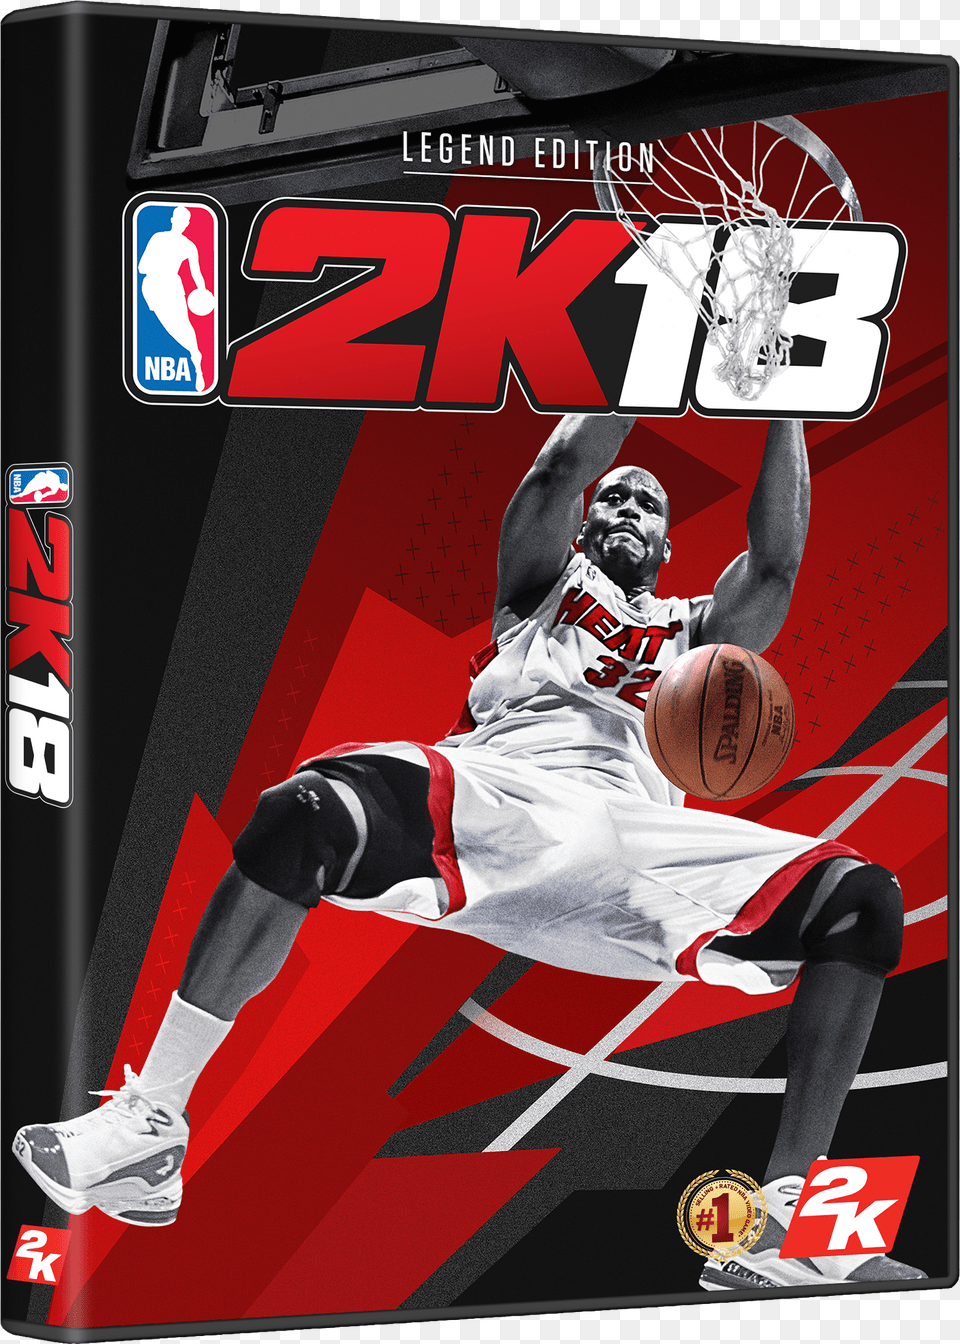 Big Aristotle39 Shaquille O39neal Booms Back To Nba 2k18 Legend Edition Png Image